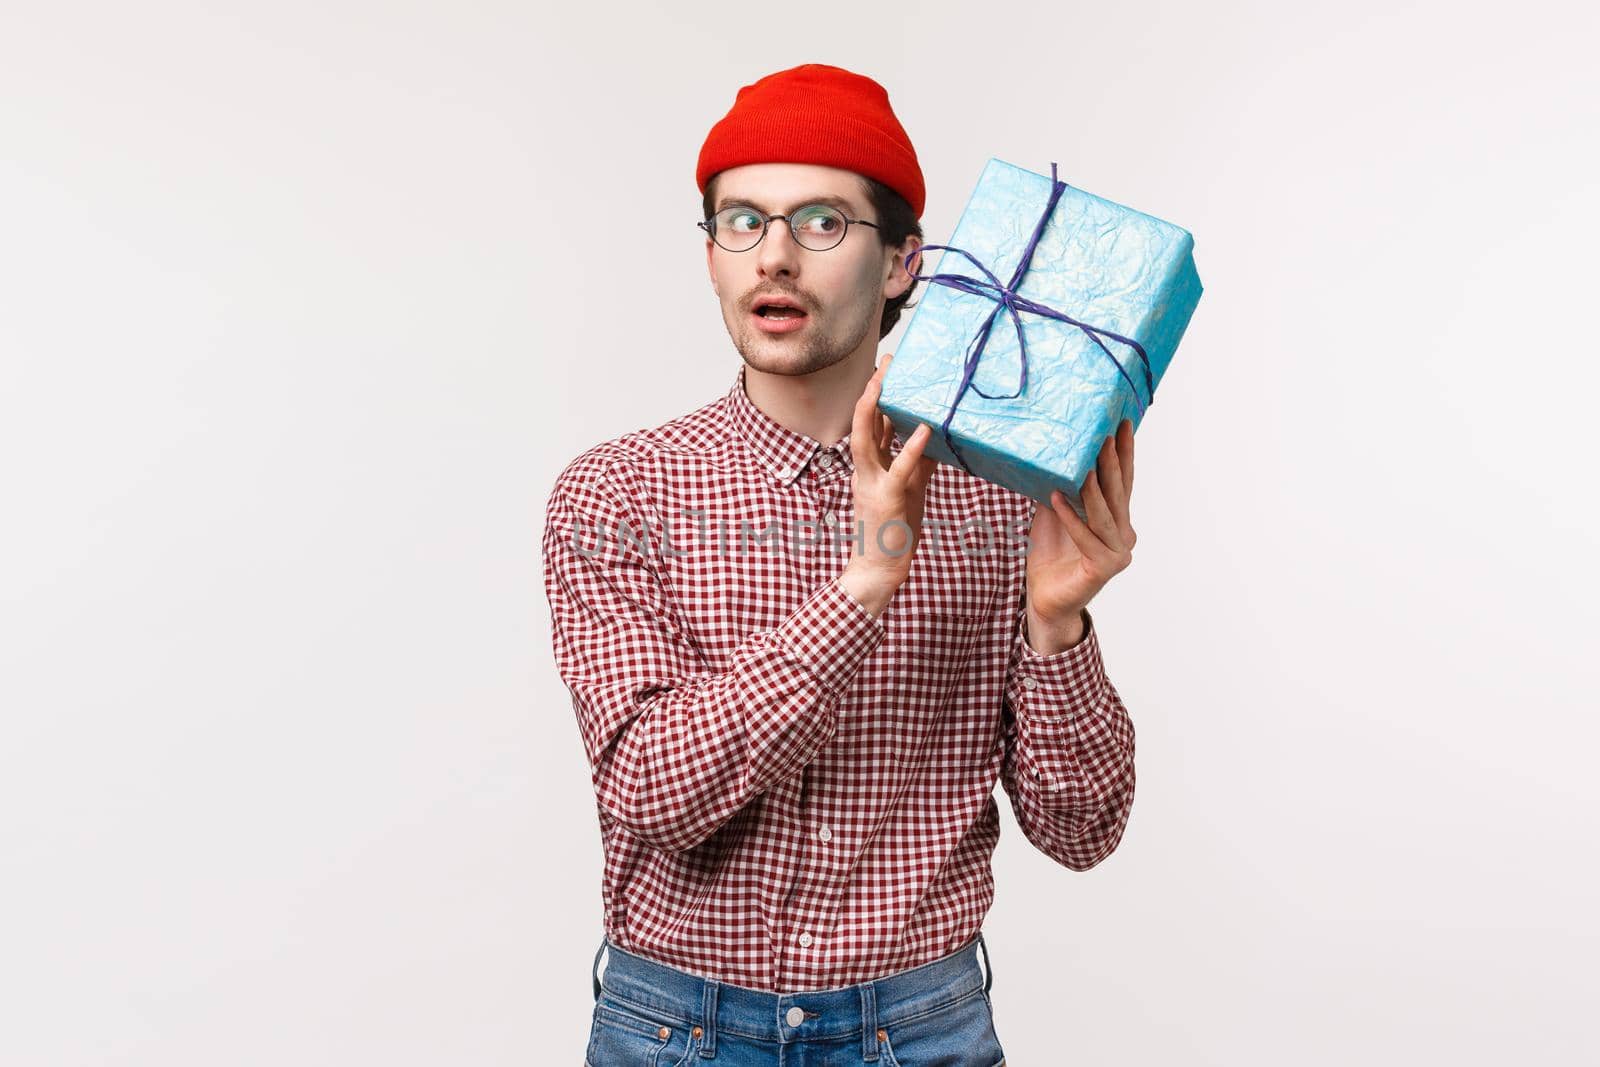 Waist-up portrait of curious funny caucasian bearded man in red beanie, glasses, shaking gift box near ear as trying guess whats inside, look focused, want to open surprise and see present.